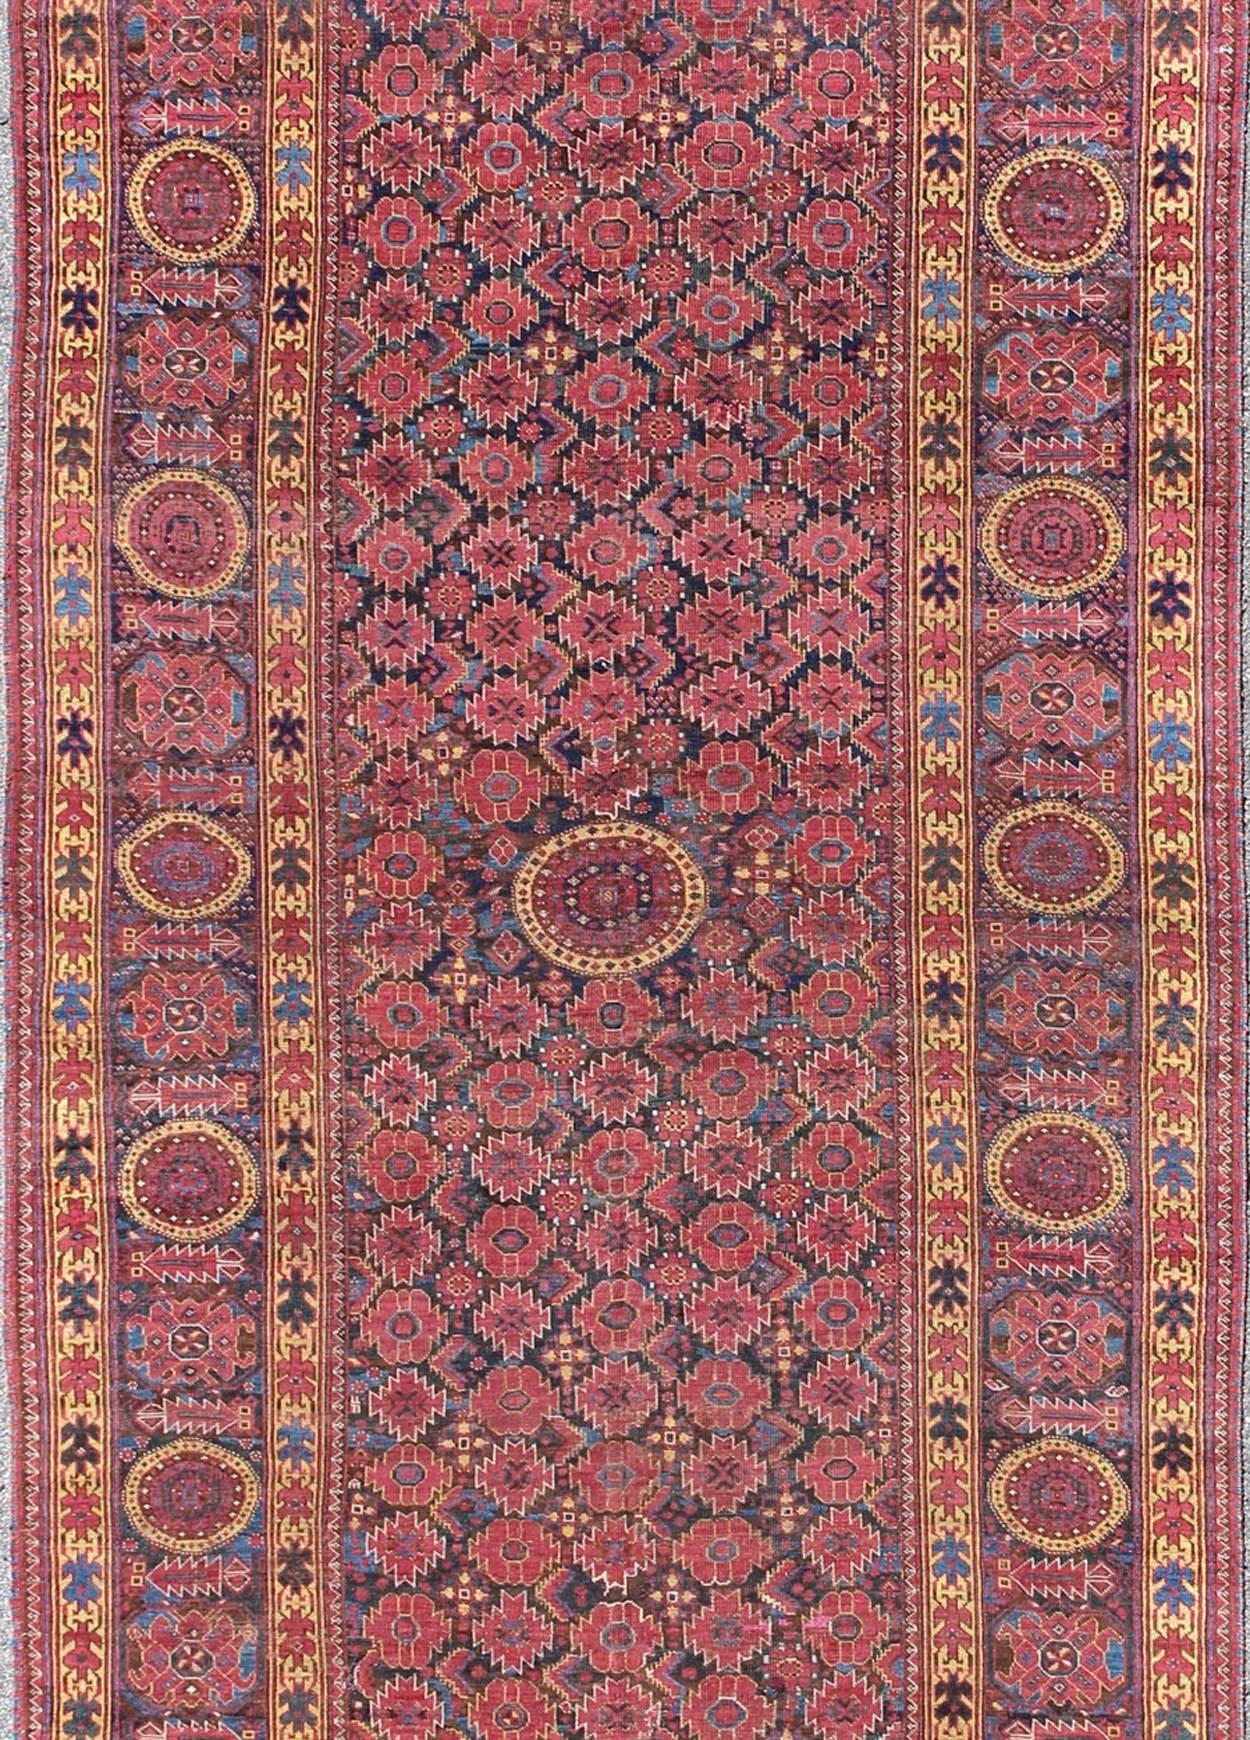 Tribal Rare 19th Century Antique Beshir Long Gallery Rug in Unique Colors For Sale